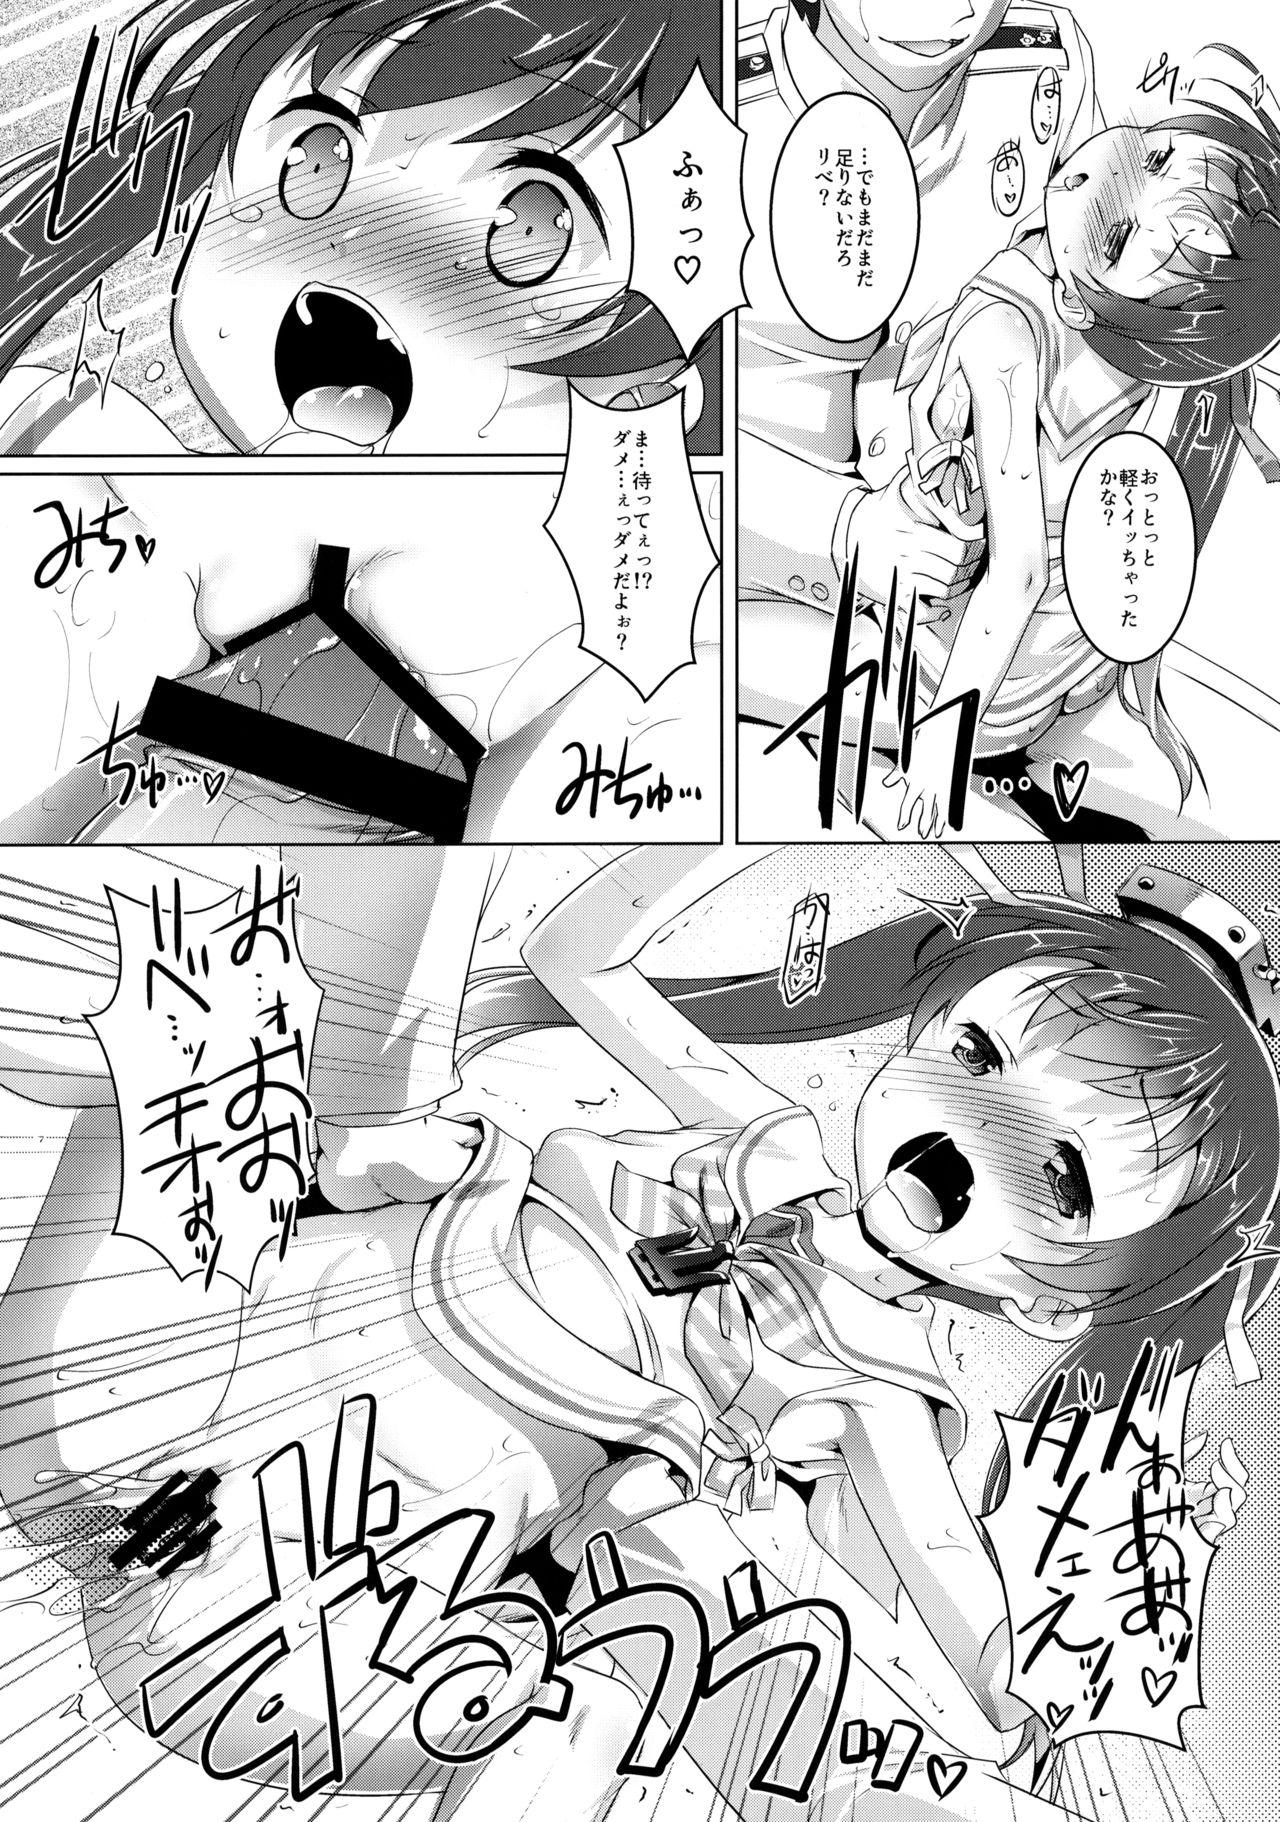 Masterbate Chao Ciao~ - Kantai collection Lesbiansex - Page 10